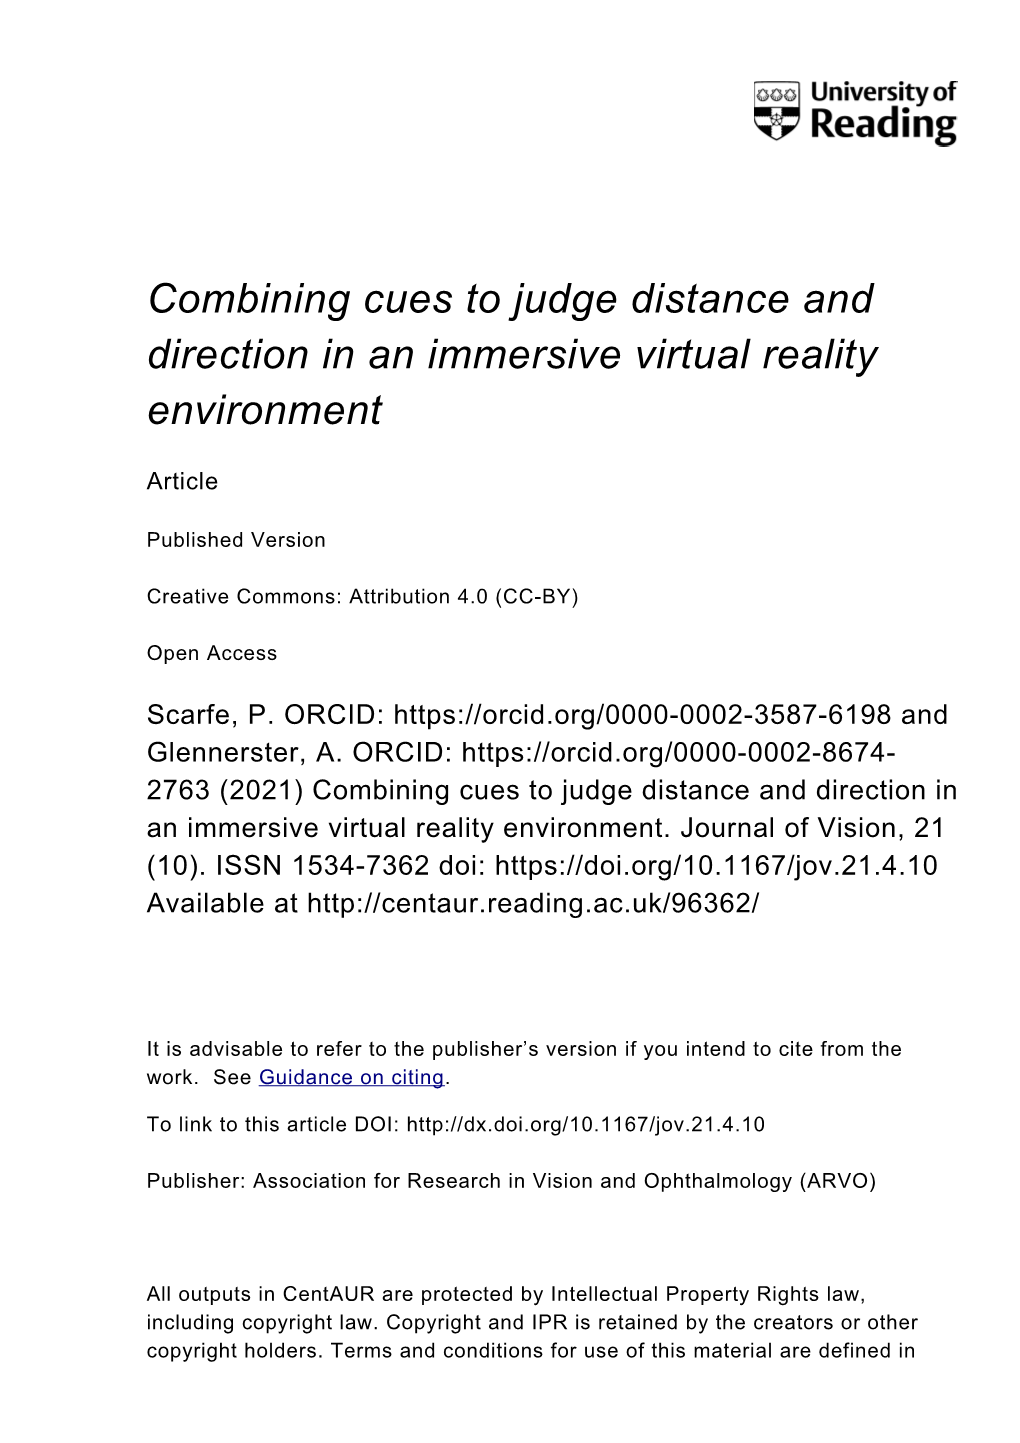 Combining Cues to Judge Distance and Direction in an Immersive Virtual Reality Environment